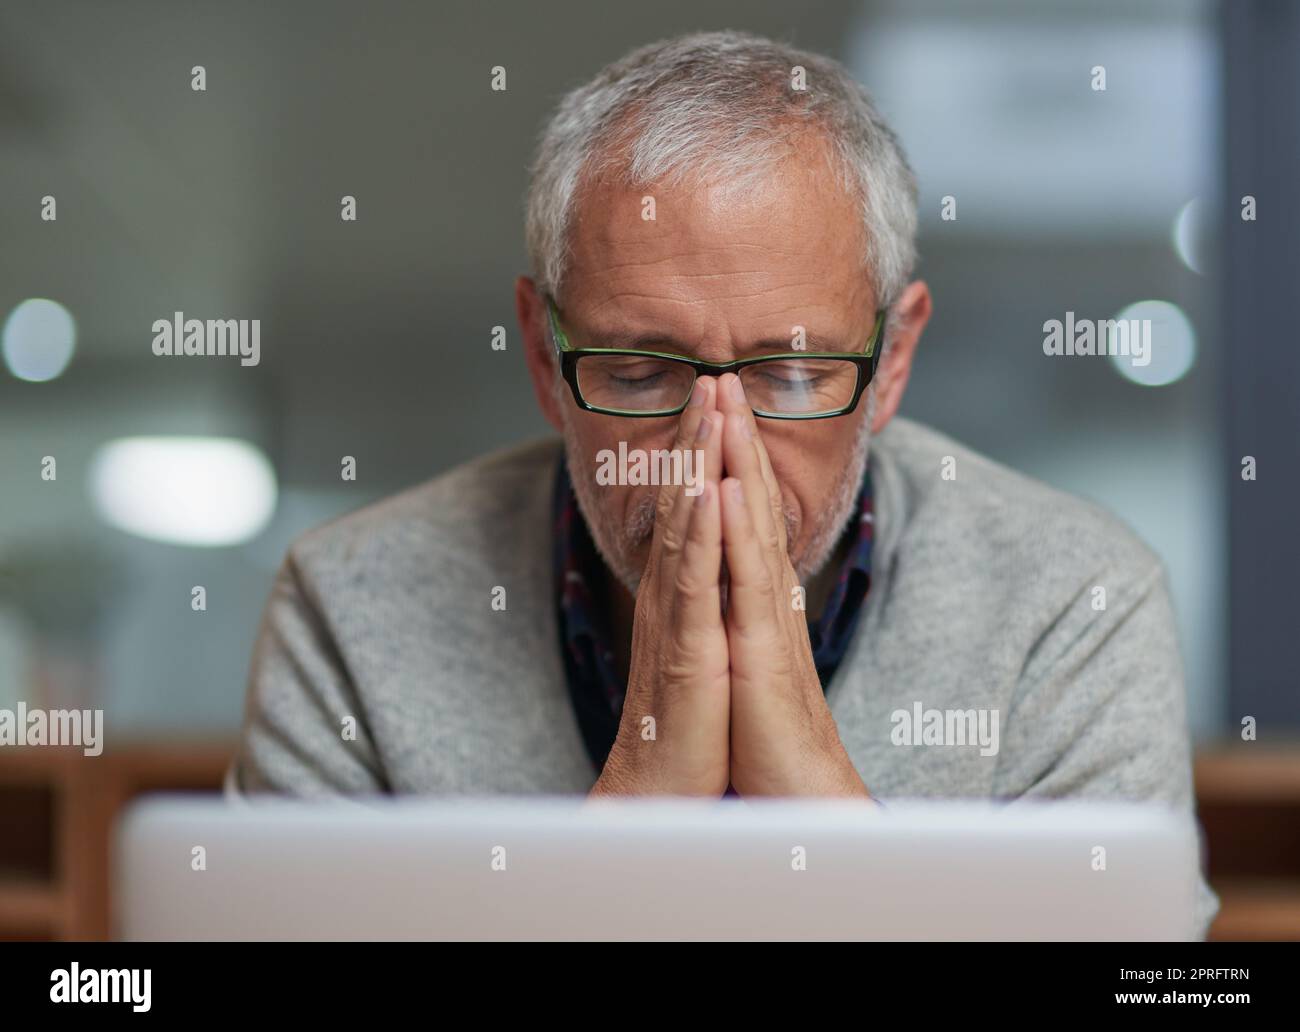 Feeling the pressure of work. a stressed out mature businessman using a laptop while working in an office. Stock Photo